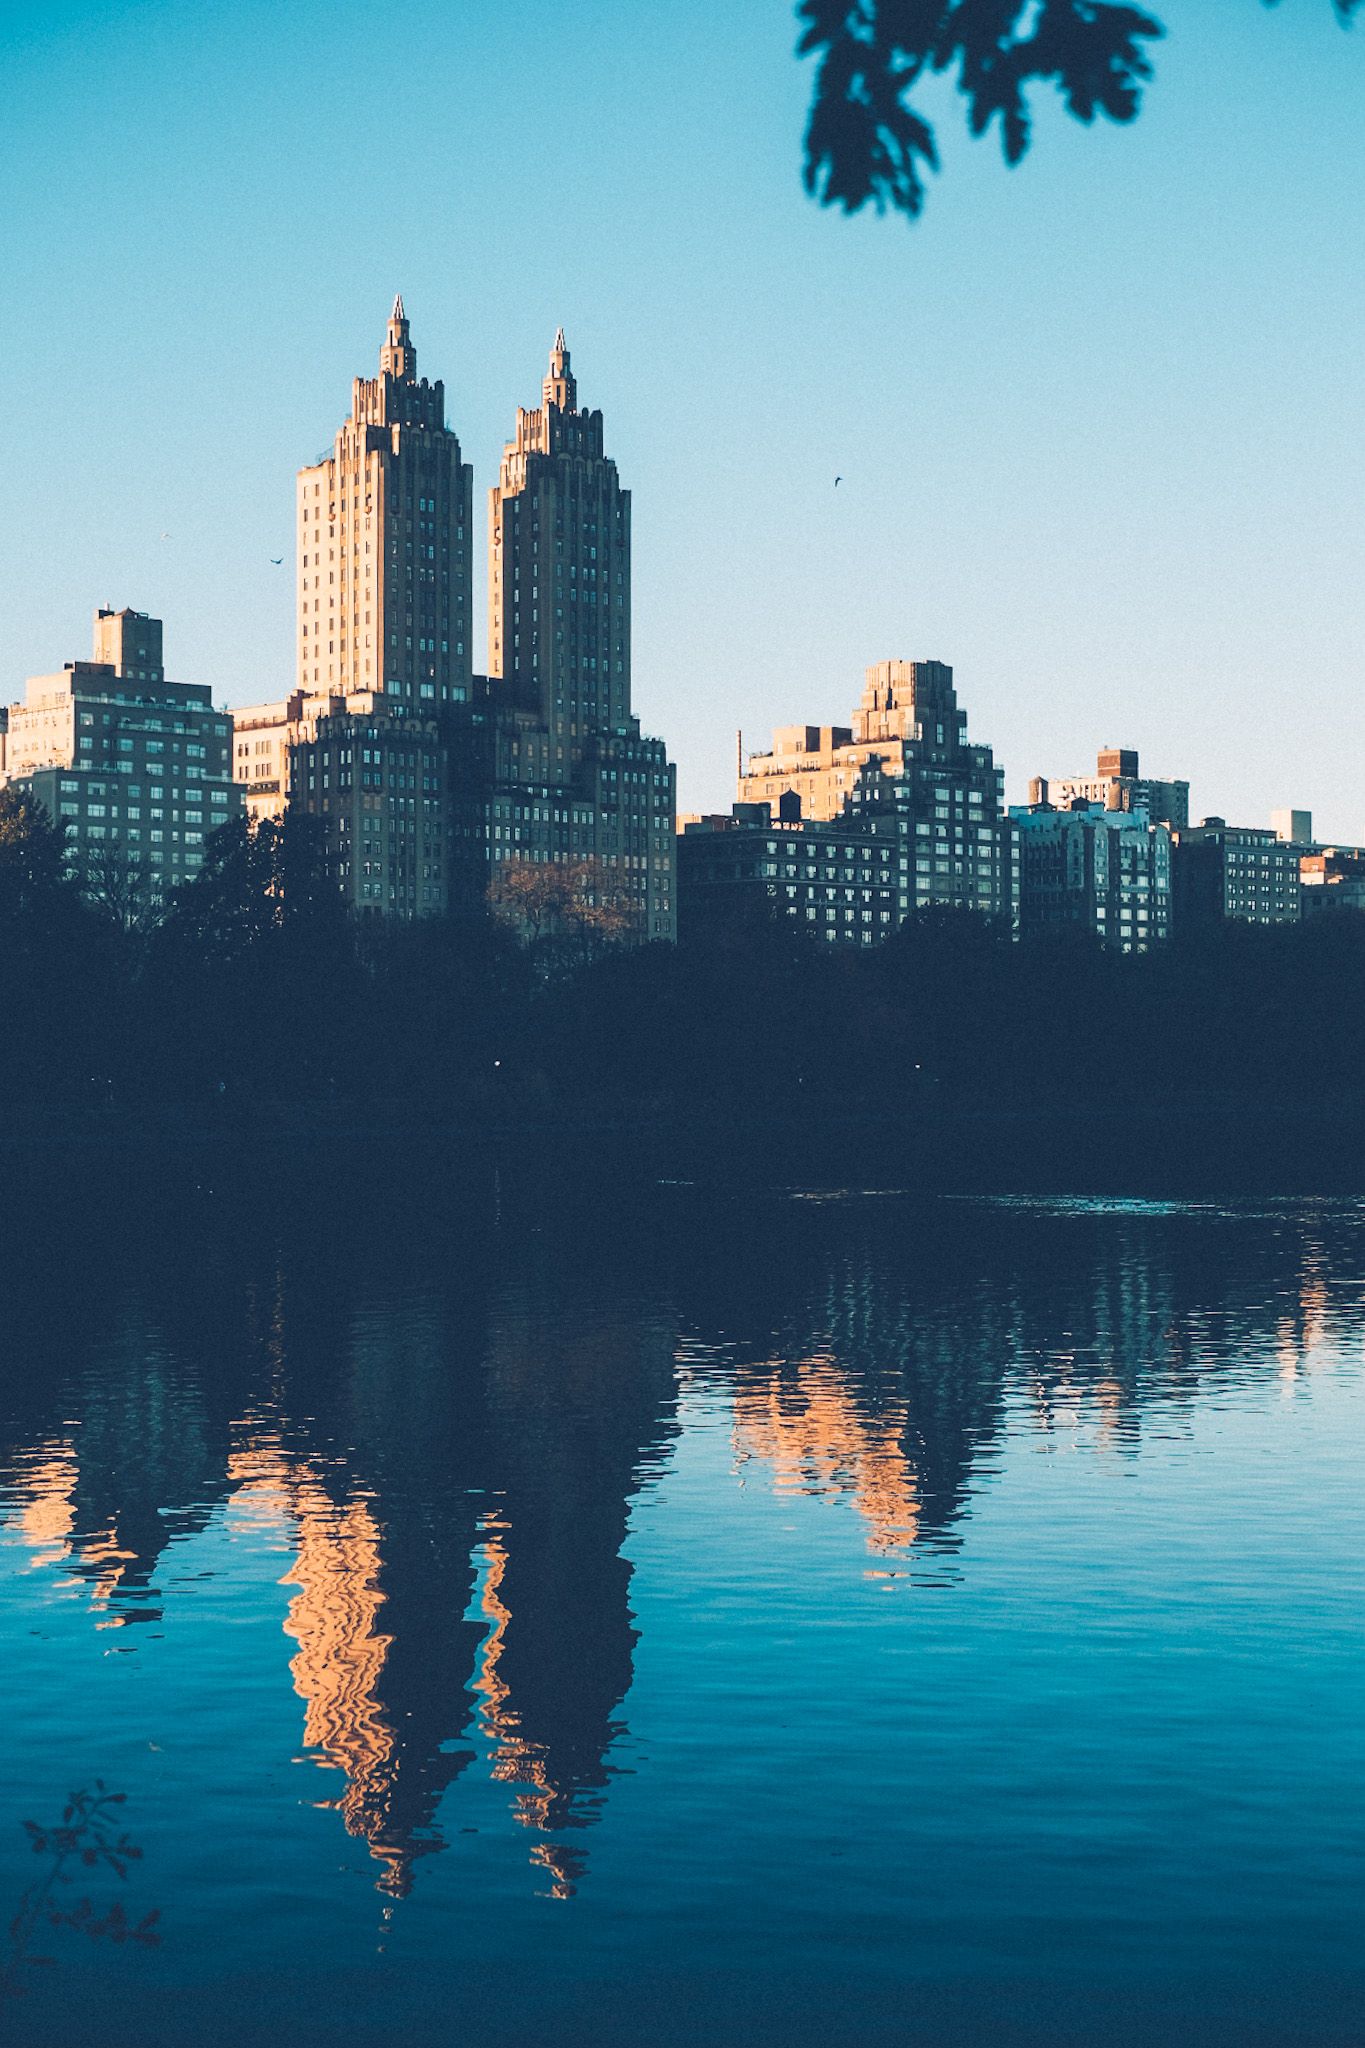 An iconic two-towered building hovers on the edge of Central Park, reflected in the lake on a clear blue-skied day near sunset.